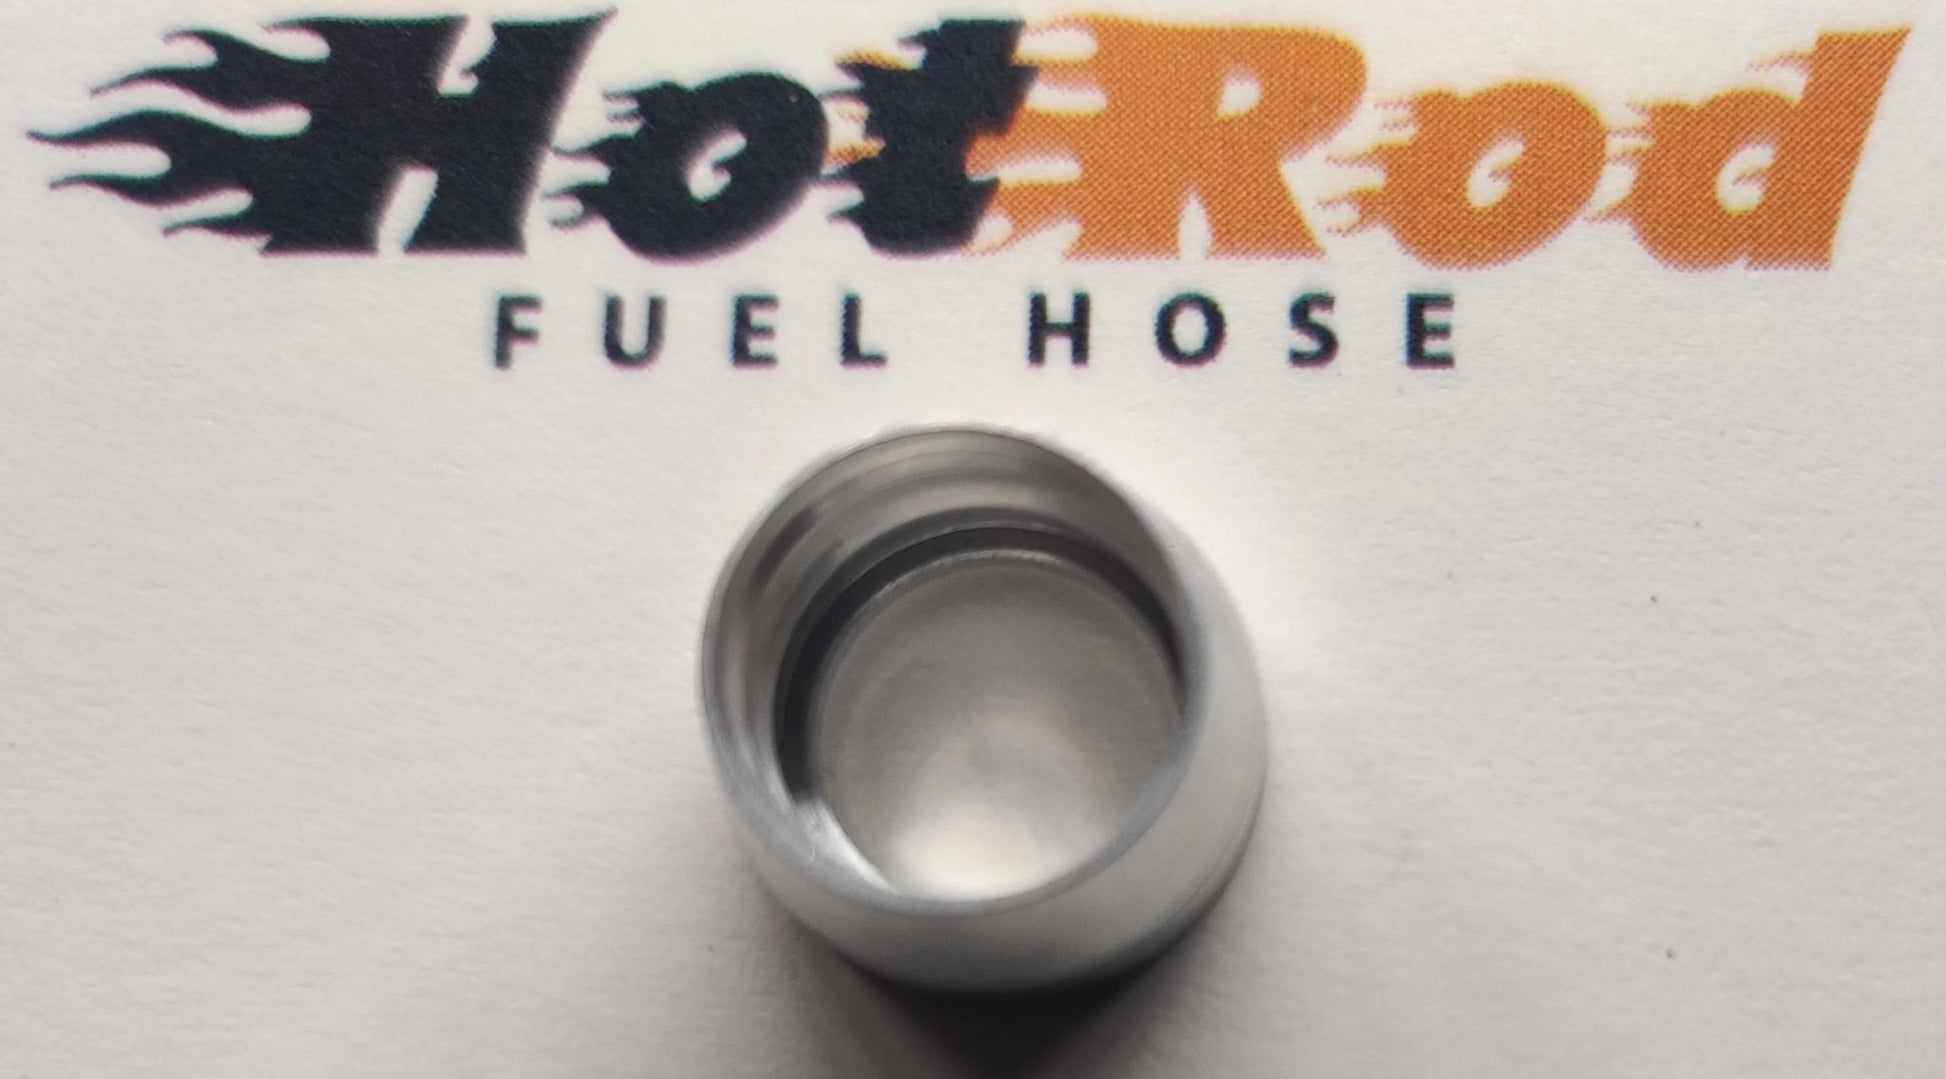 Replacement ferrules - Hot Rod fuel hose by One Guy Garage